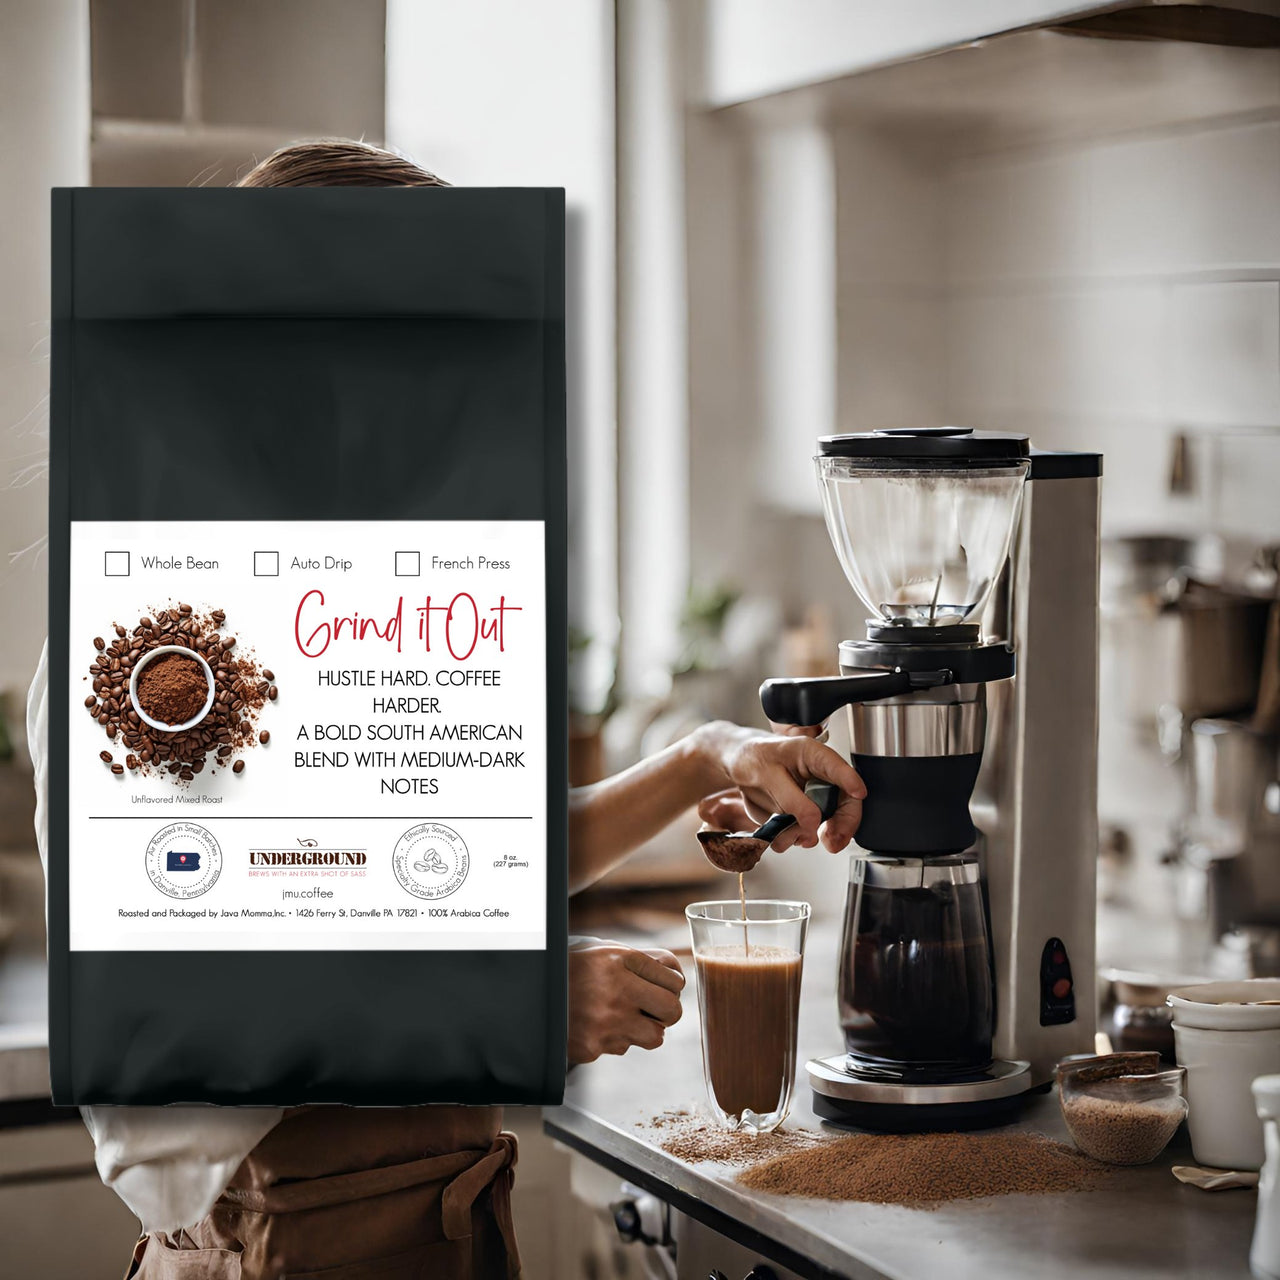 Grind it Out - Unflavored Mixed Roast - Java Momma